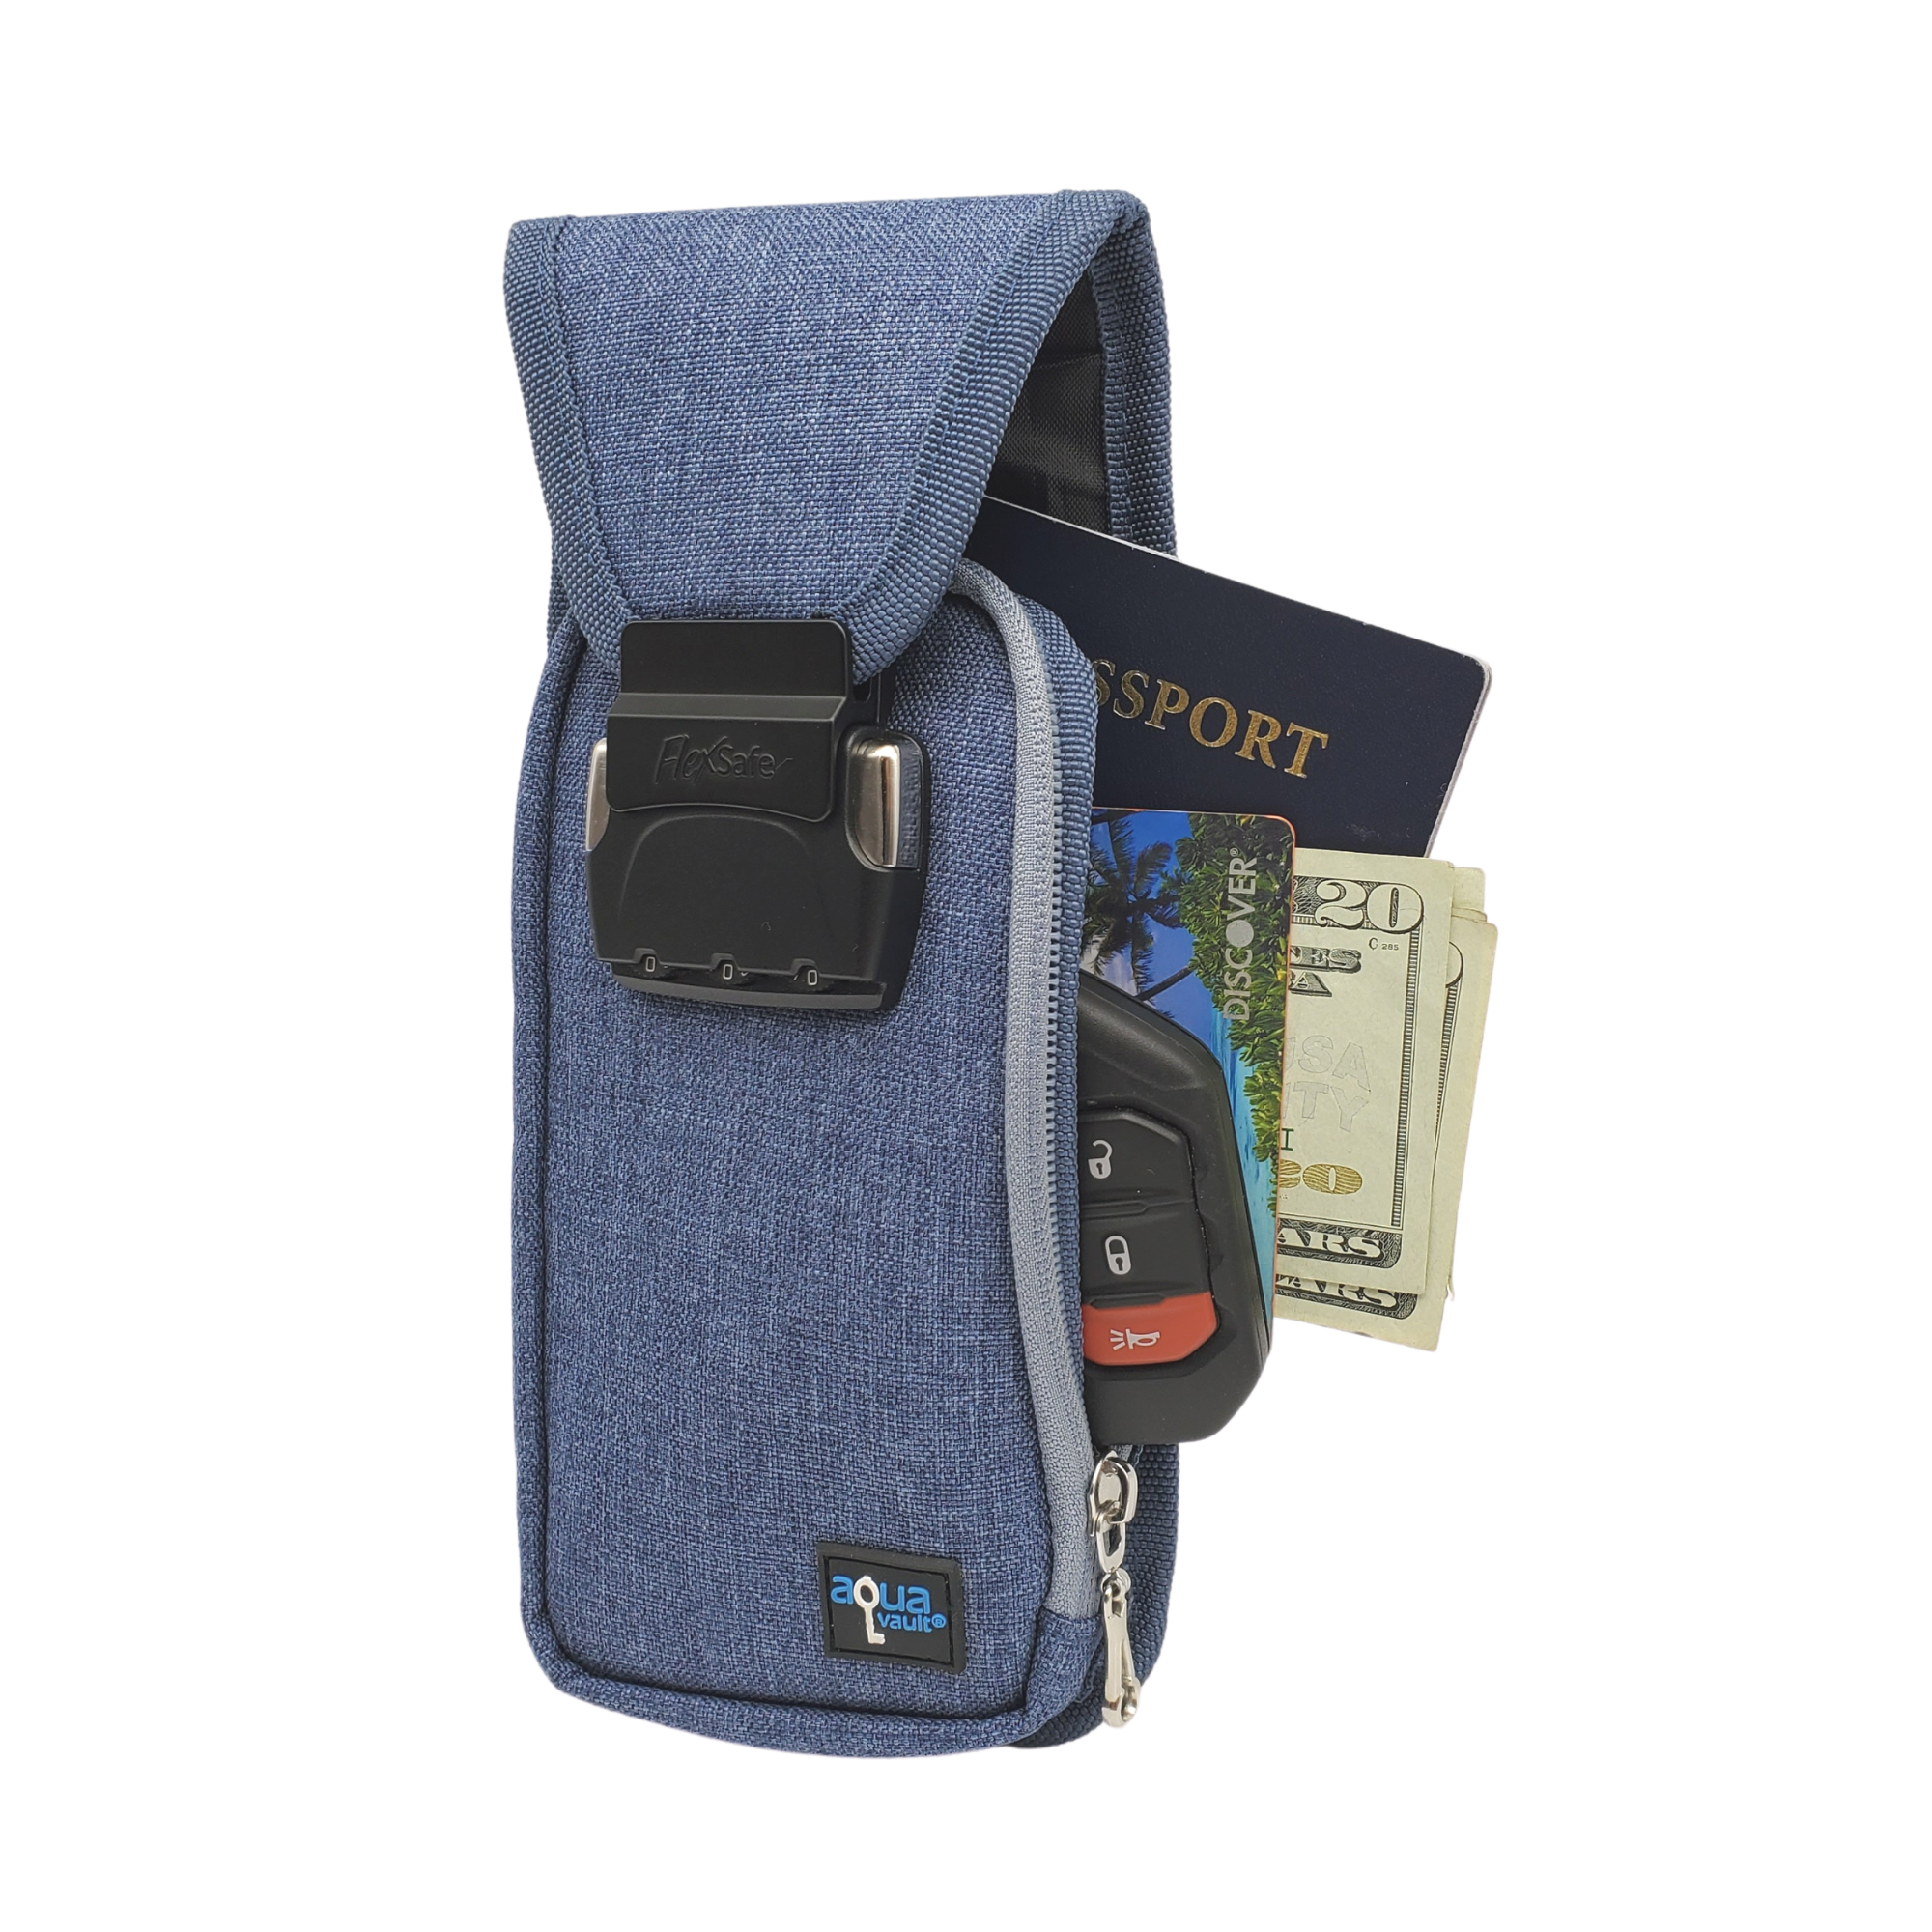 Travelsafe® Anti-Theft Portable Safe (Available in 3 sizes)